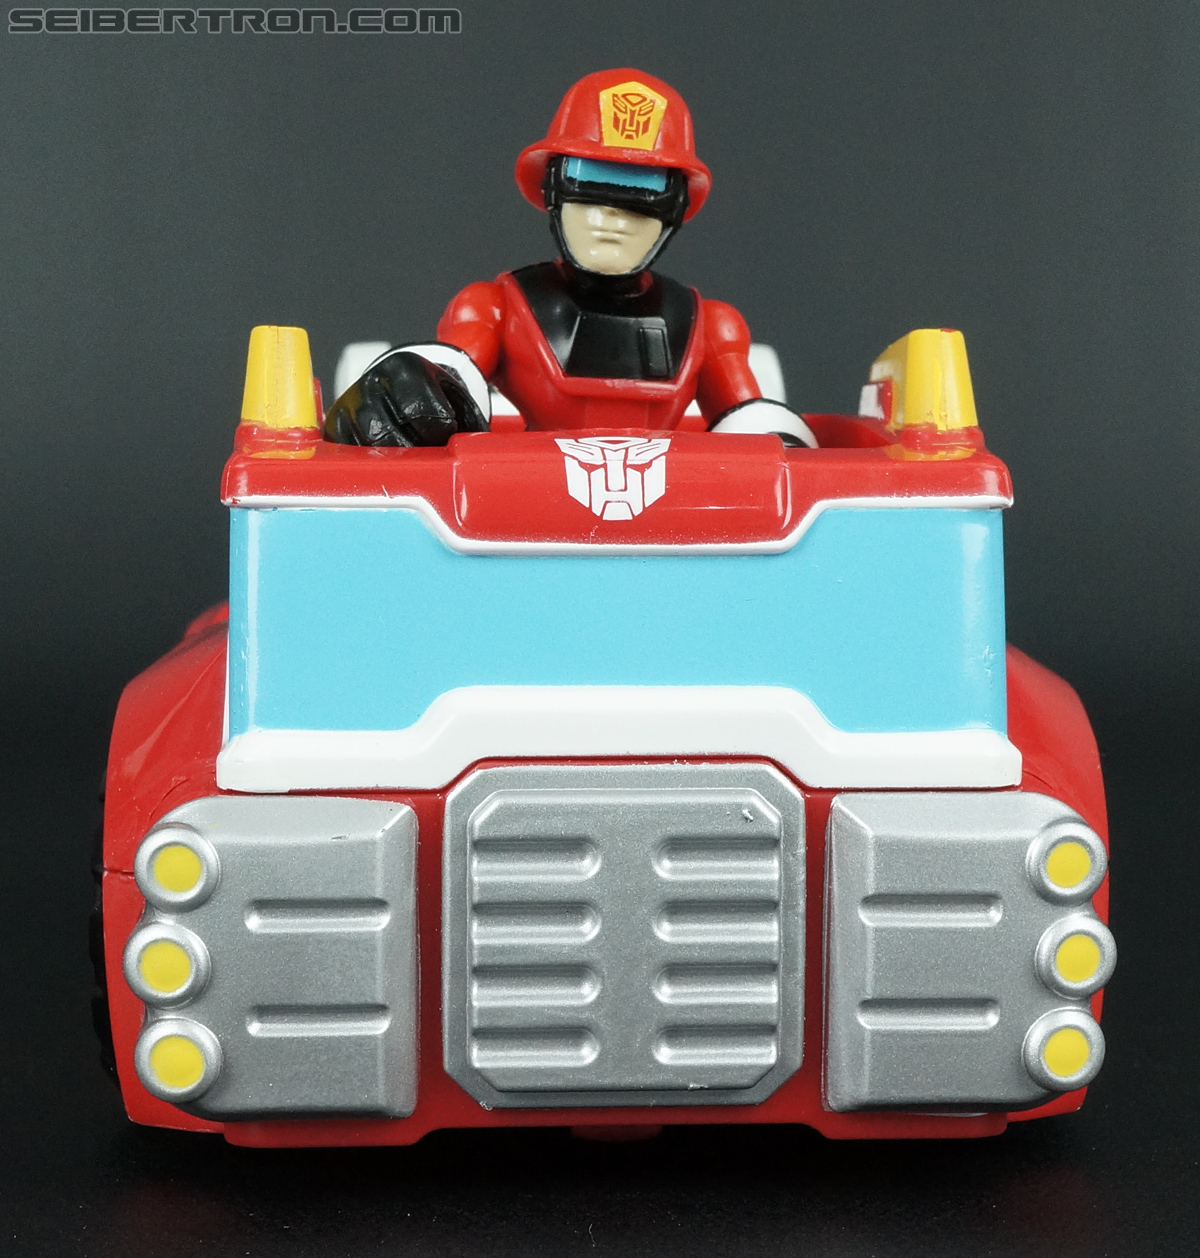 Transformers Rescue Bots Cody Burns (Fire Station Prime) (Image #11 of 66)